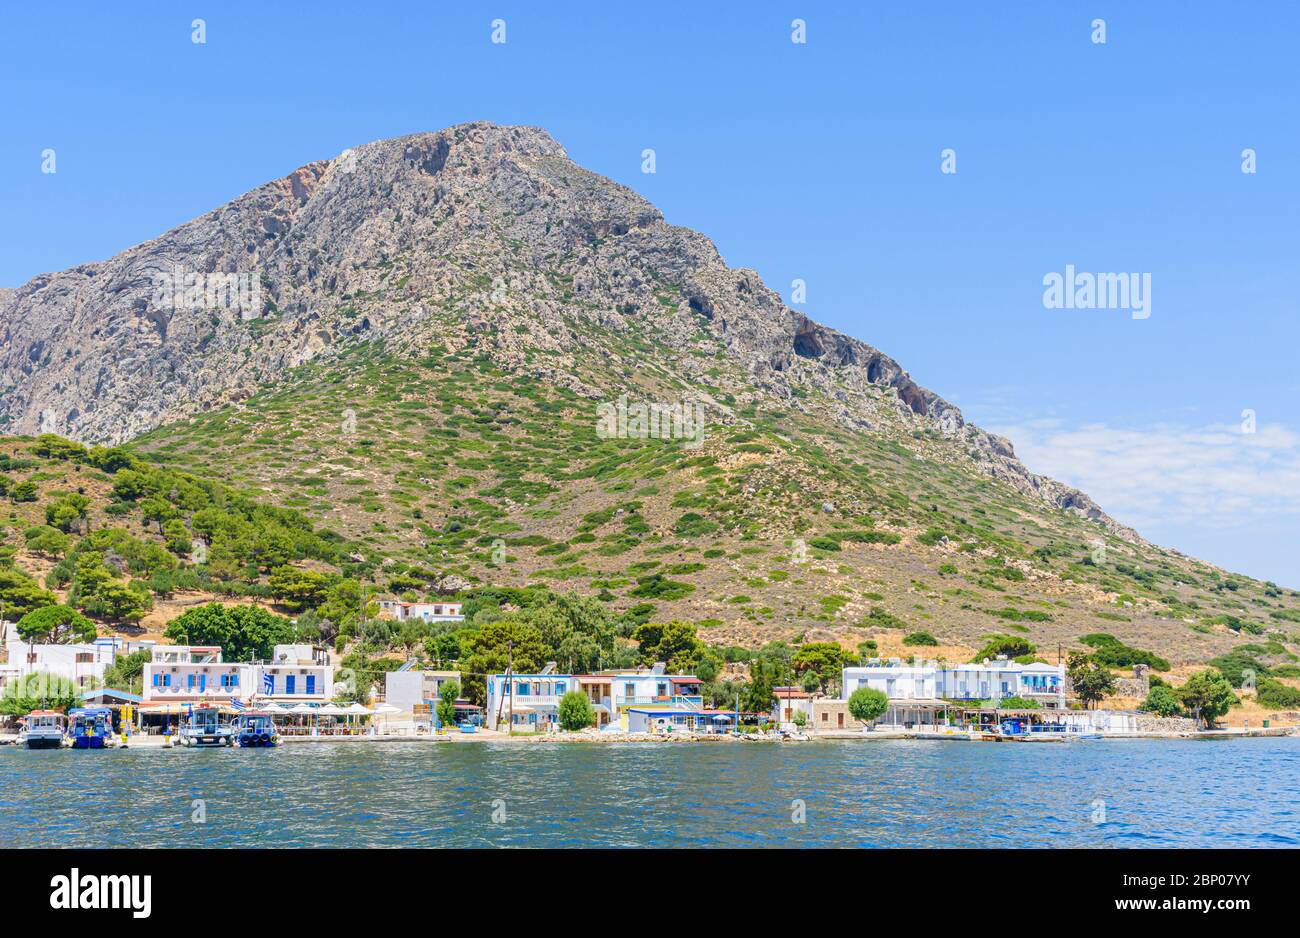 Views of the small port town of Telendos Island, Kalymnos, Dodecanese, Greece Stock Photo